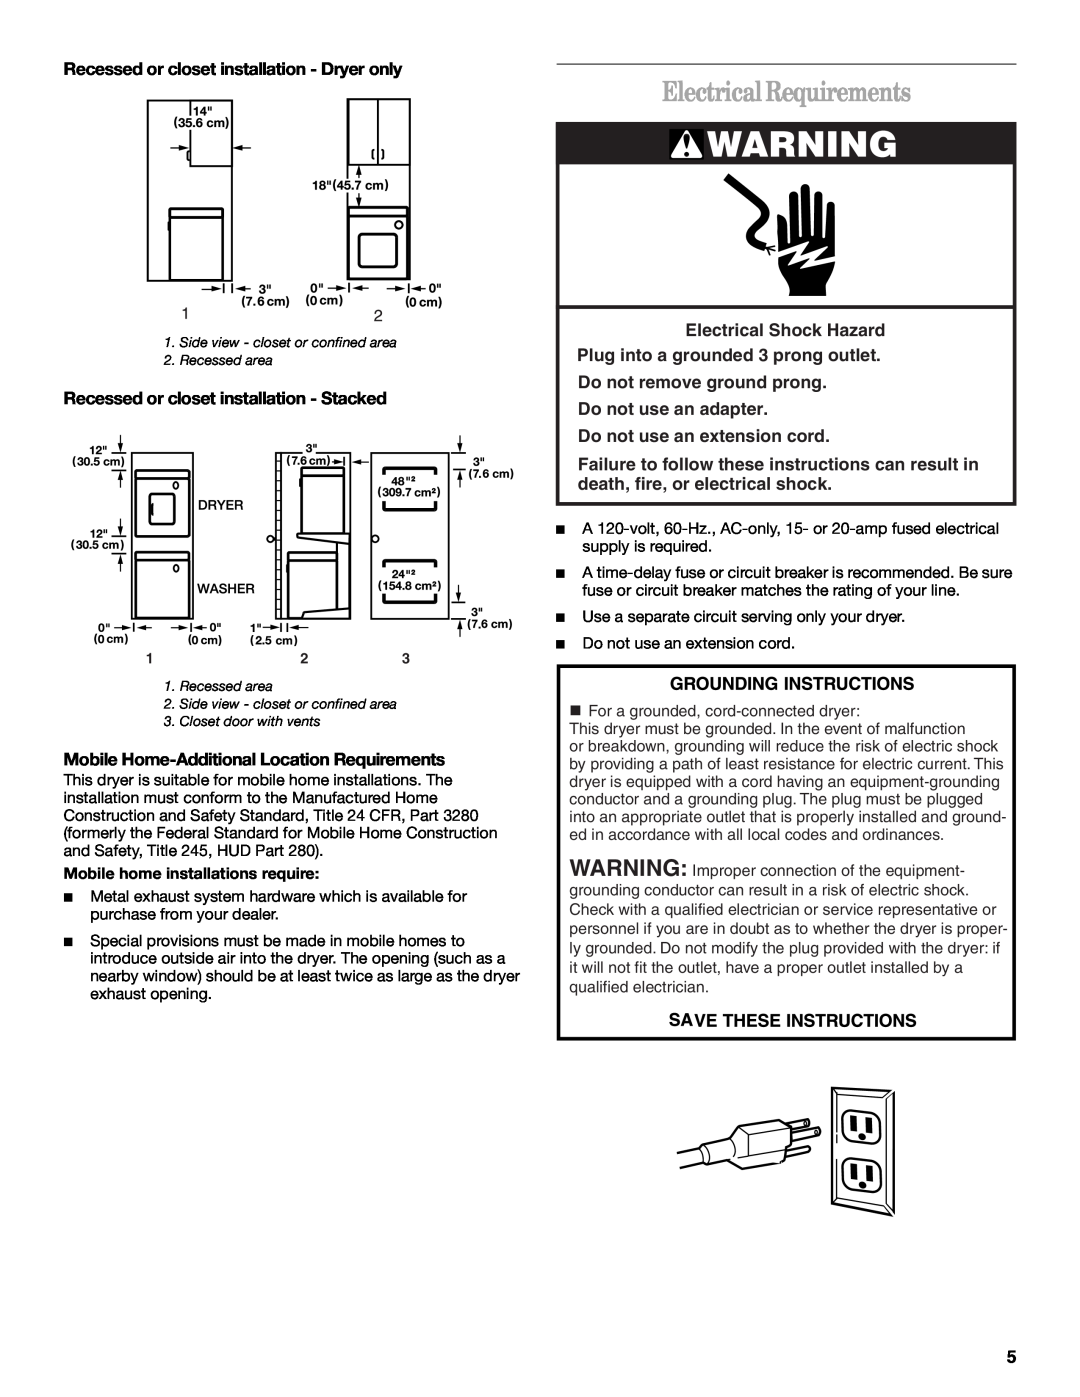 Whirlpool 3406879 Electrical Requirements, Recessed or closet installation - Dryer only, Do not use an extension cord 